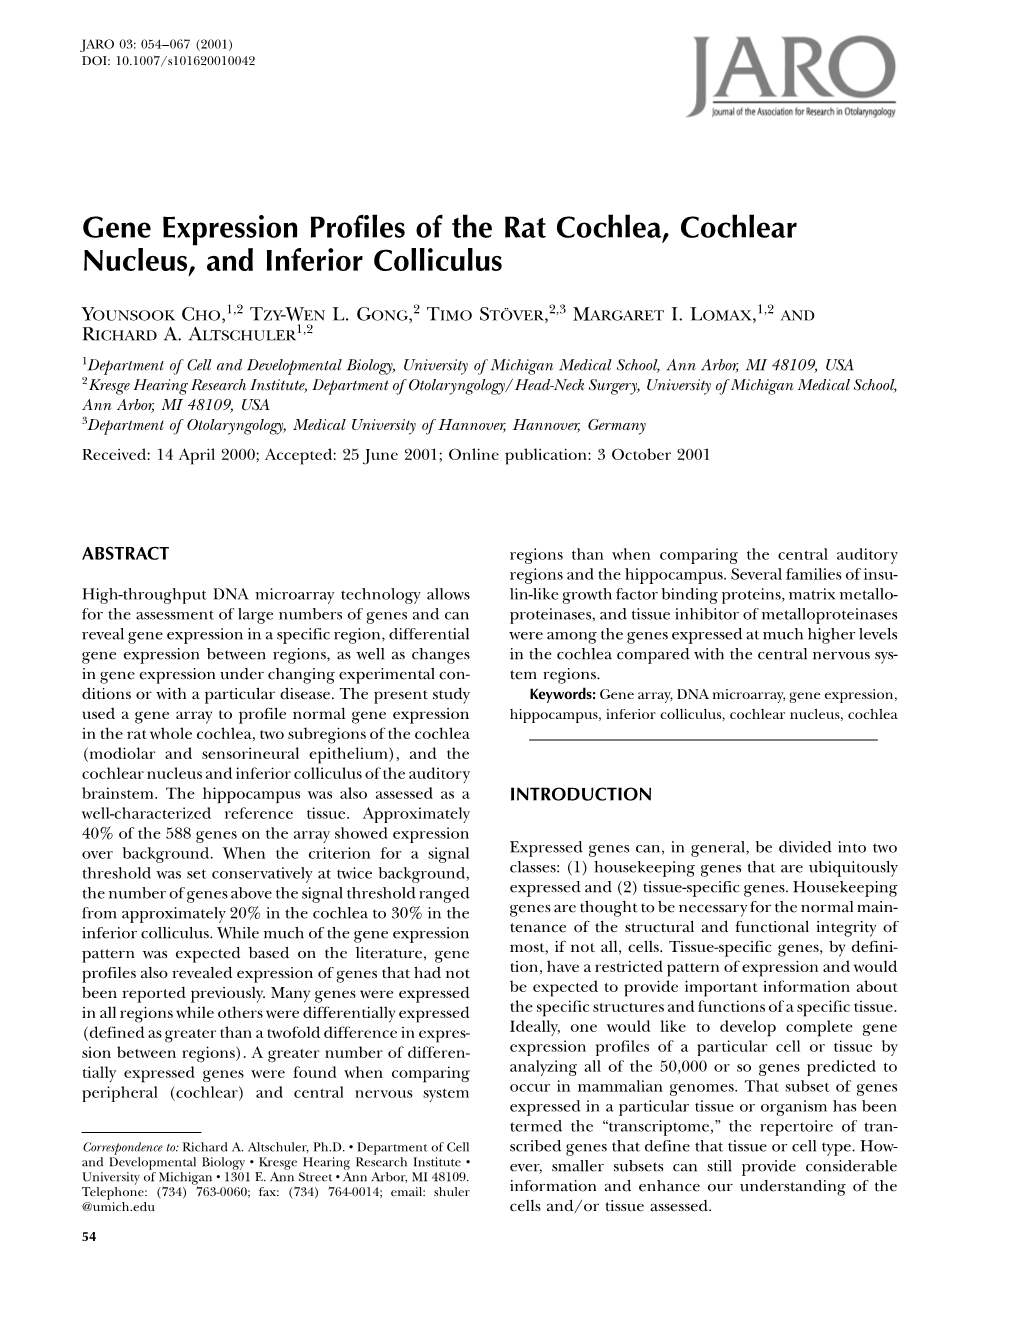 Gene Expression Profiles of the Rat Cochlea, Cochlear Nucleus, and Inferior Colliculus